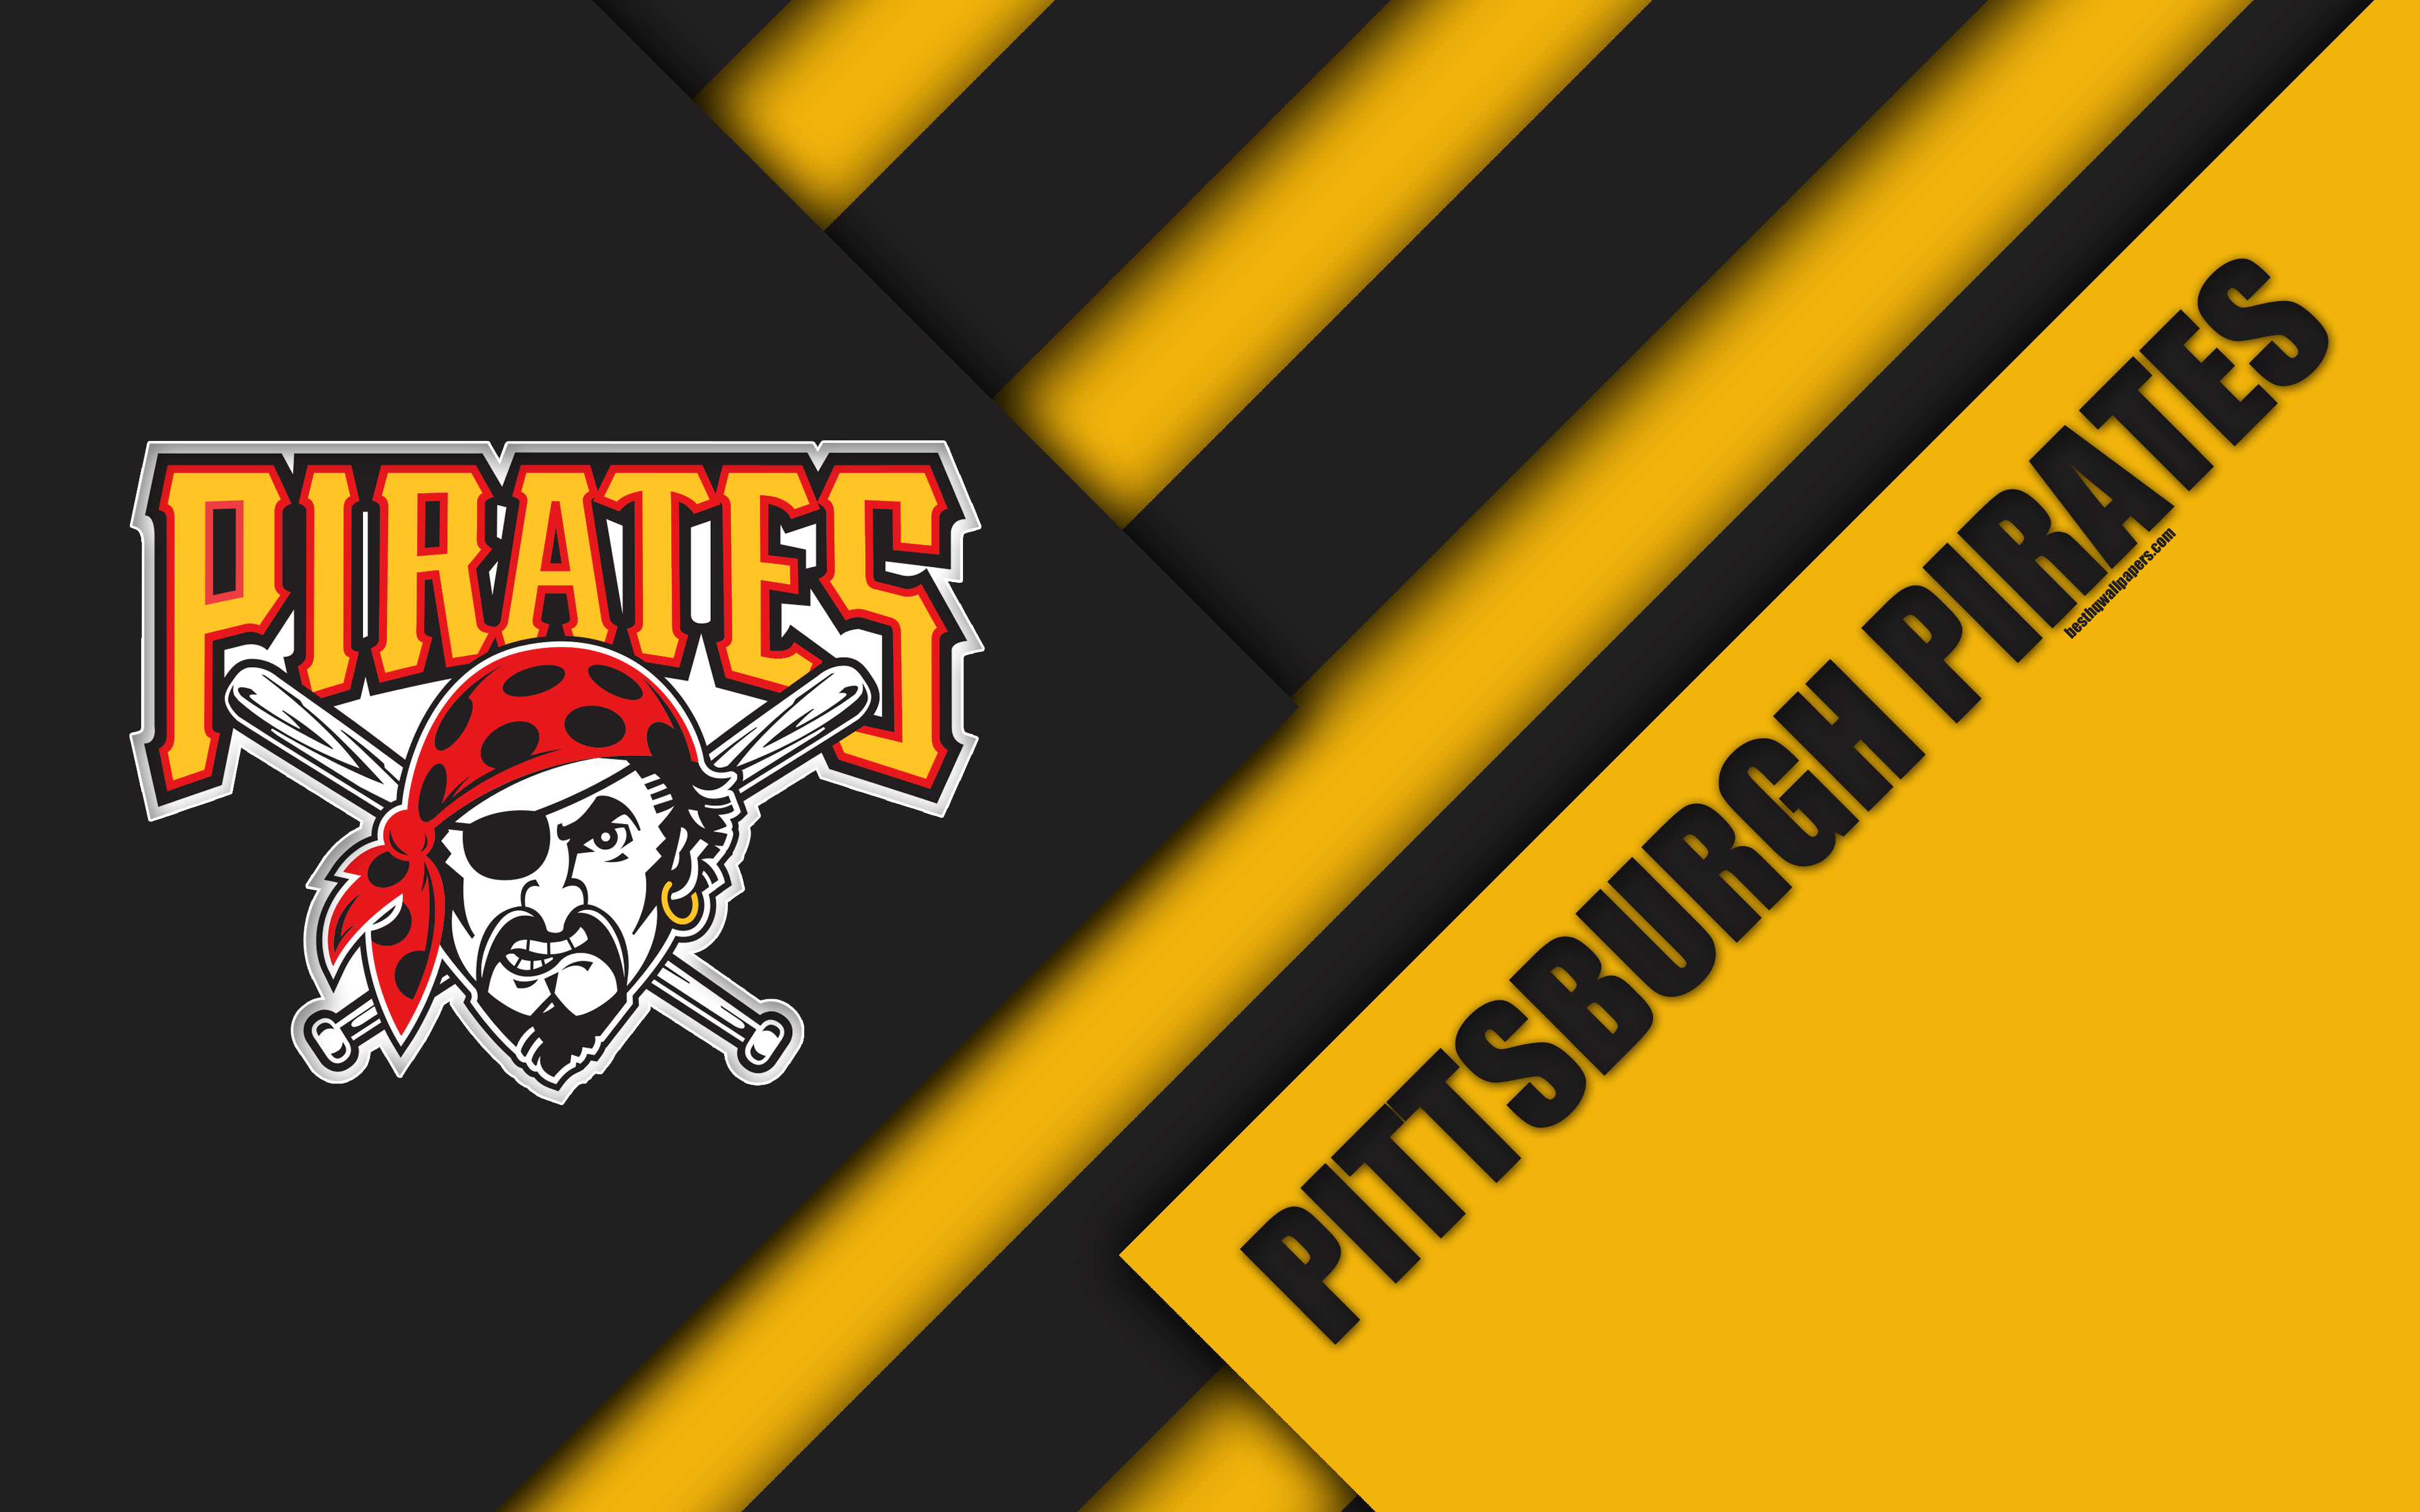 Download wallpapers Pittsburgh Pirates MLB 4k black and yellow